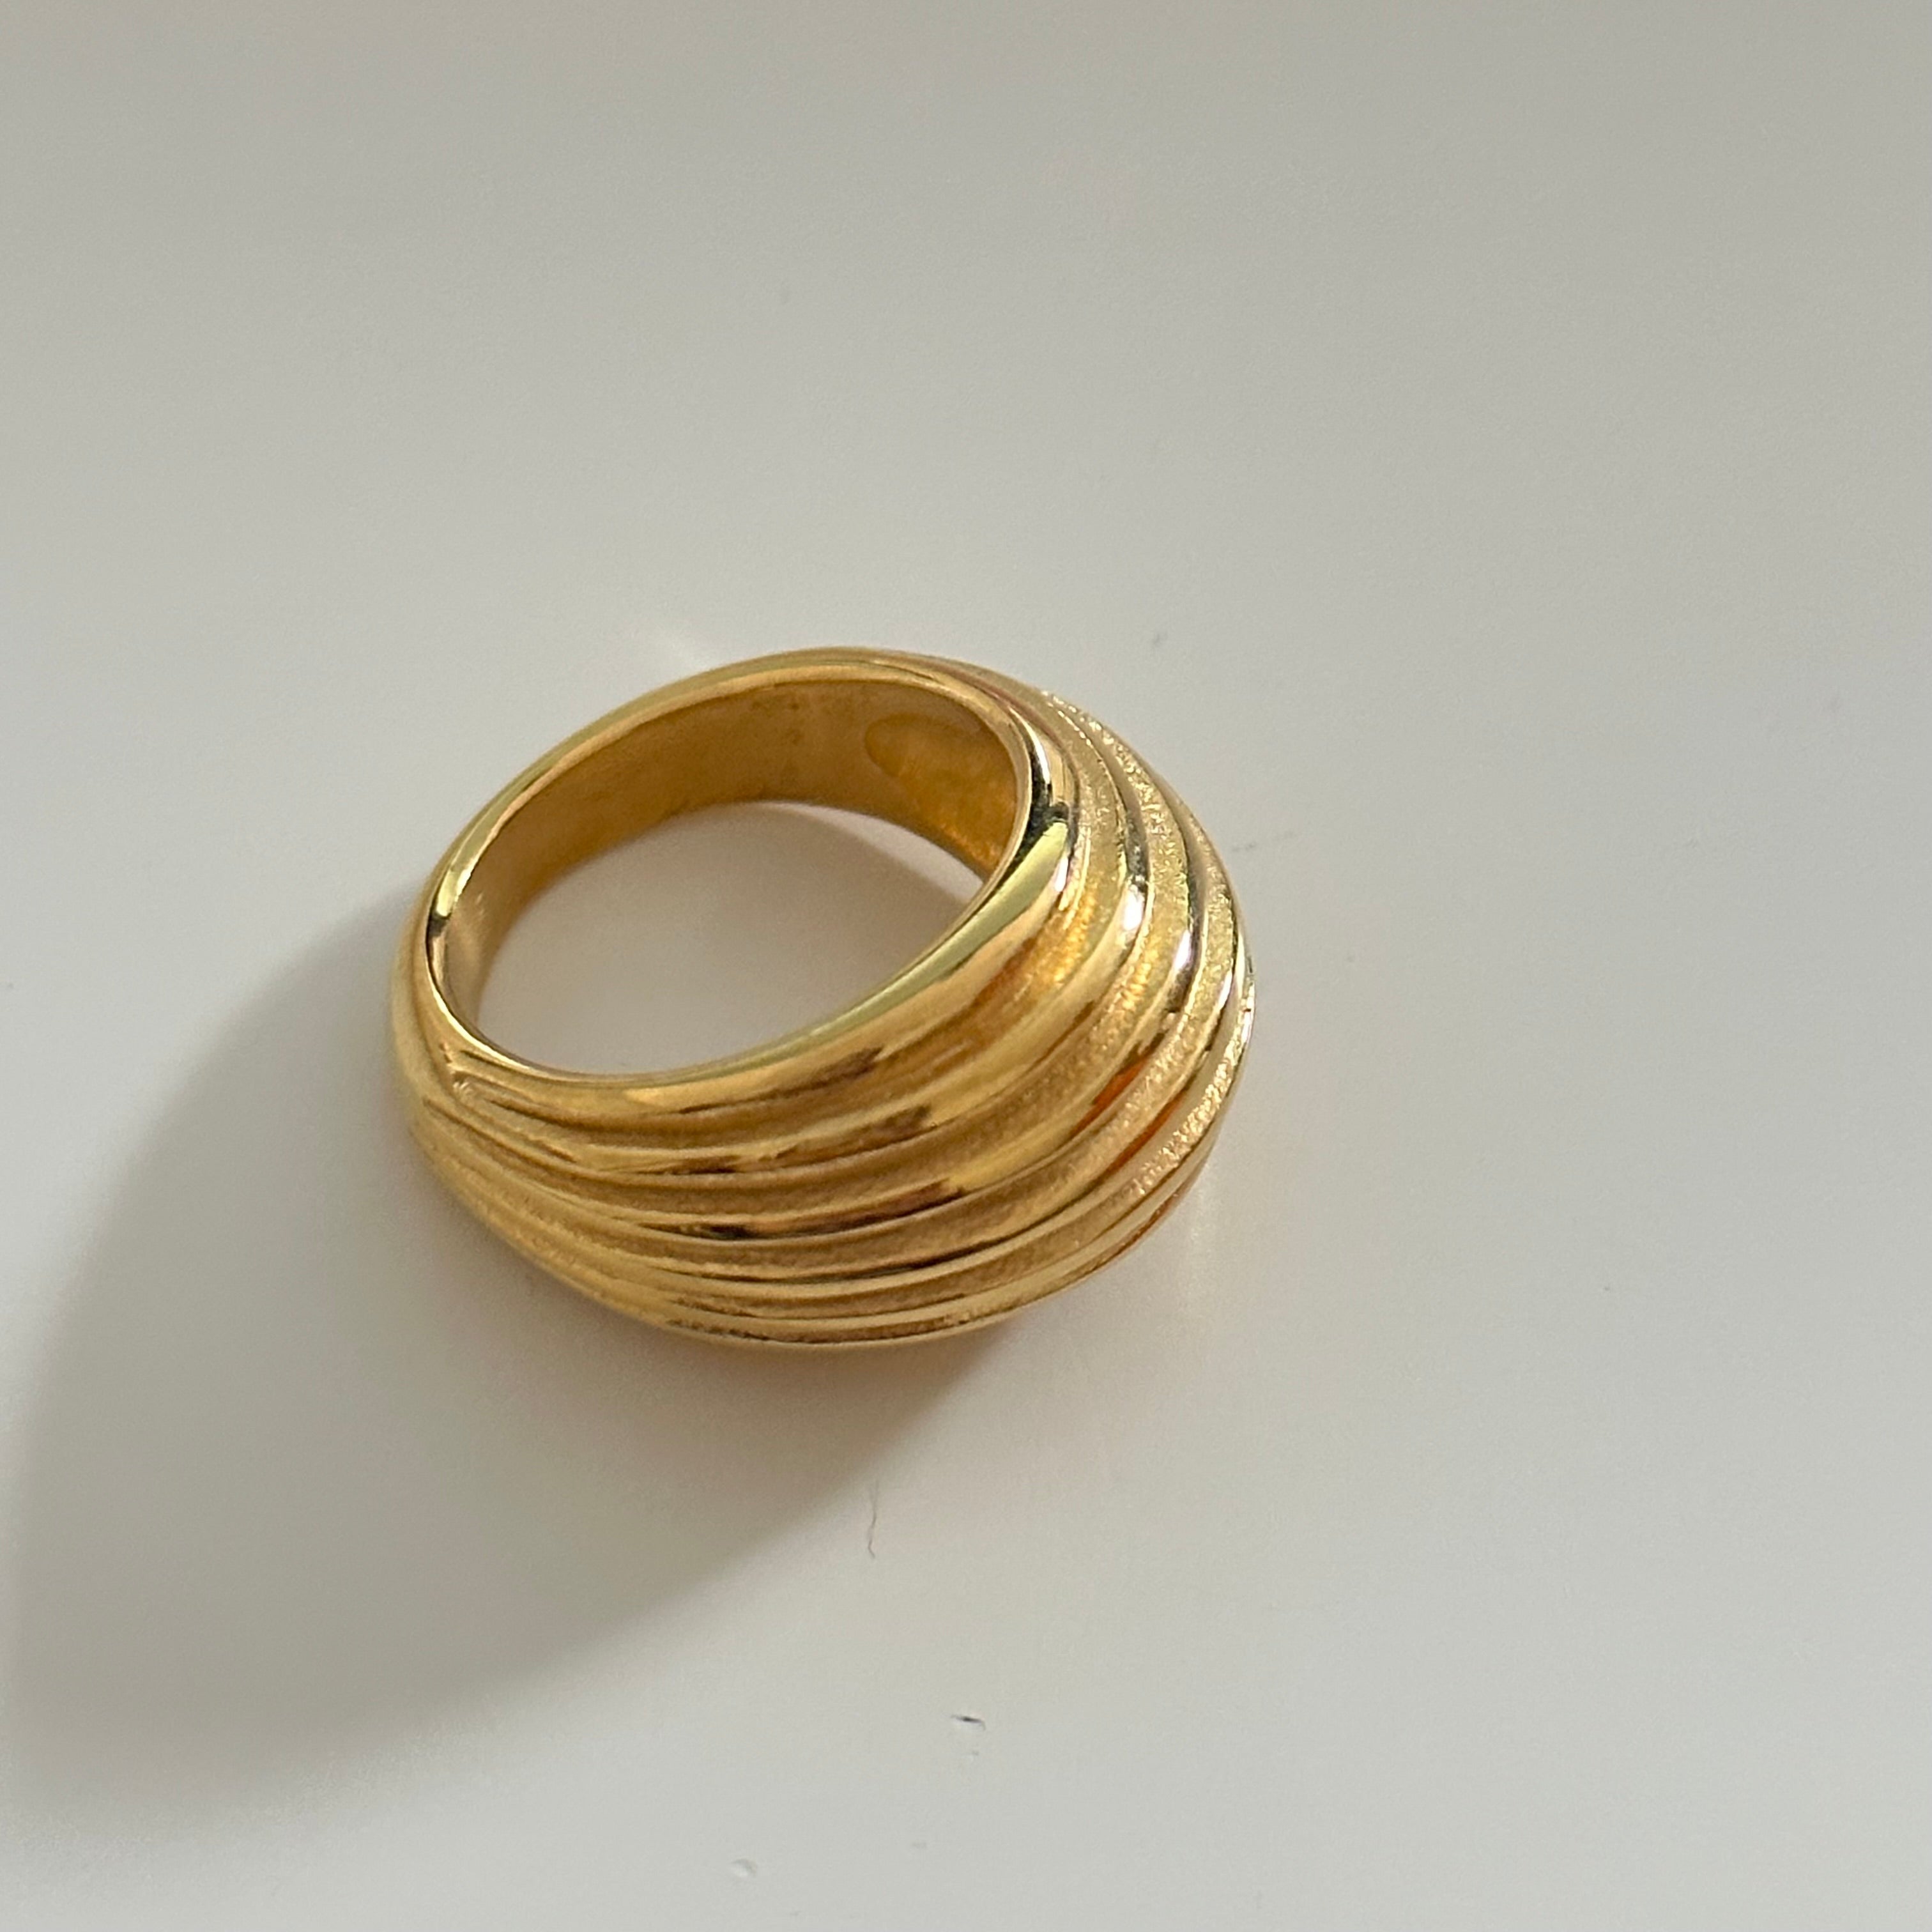 Chunky Dome Shaped Ridged Ring in 18k Gold Plated Brass - The Kira Ring